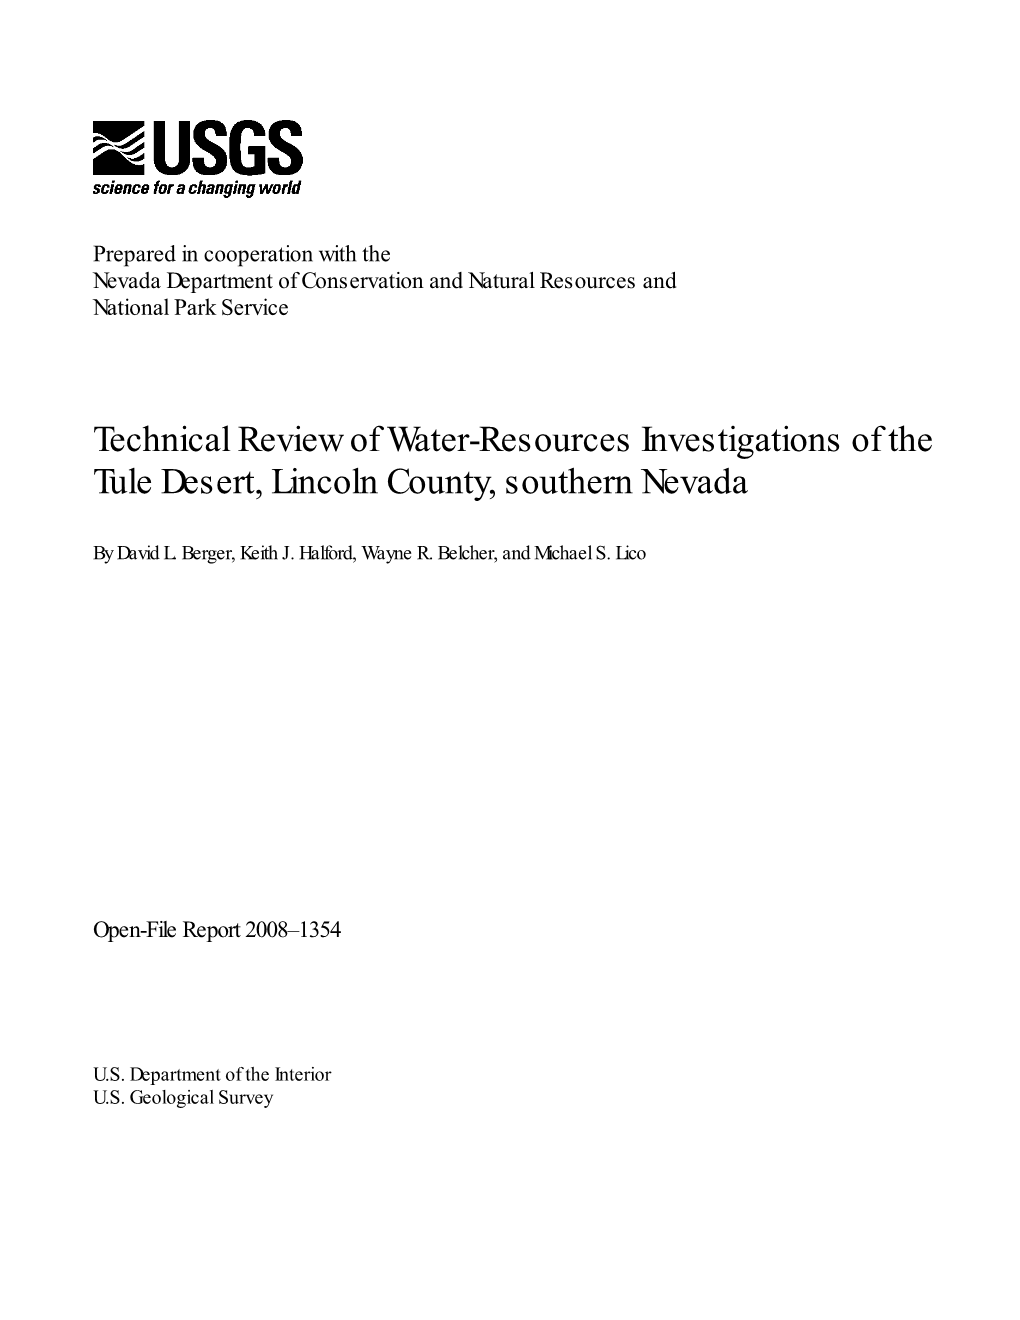 Technical Review of Water-Resources Investigations of the Tule Desert, Lincoln County, Southern Nevada